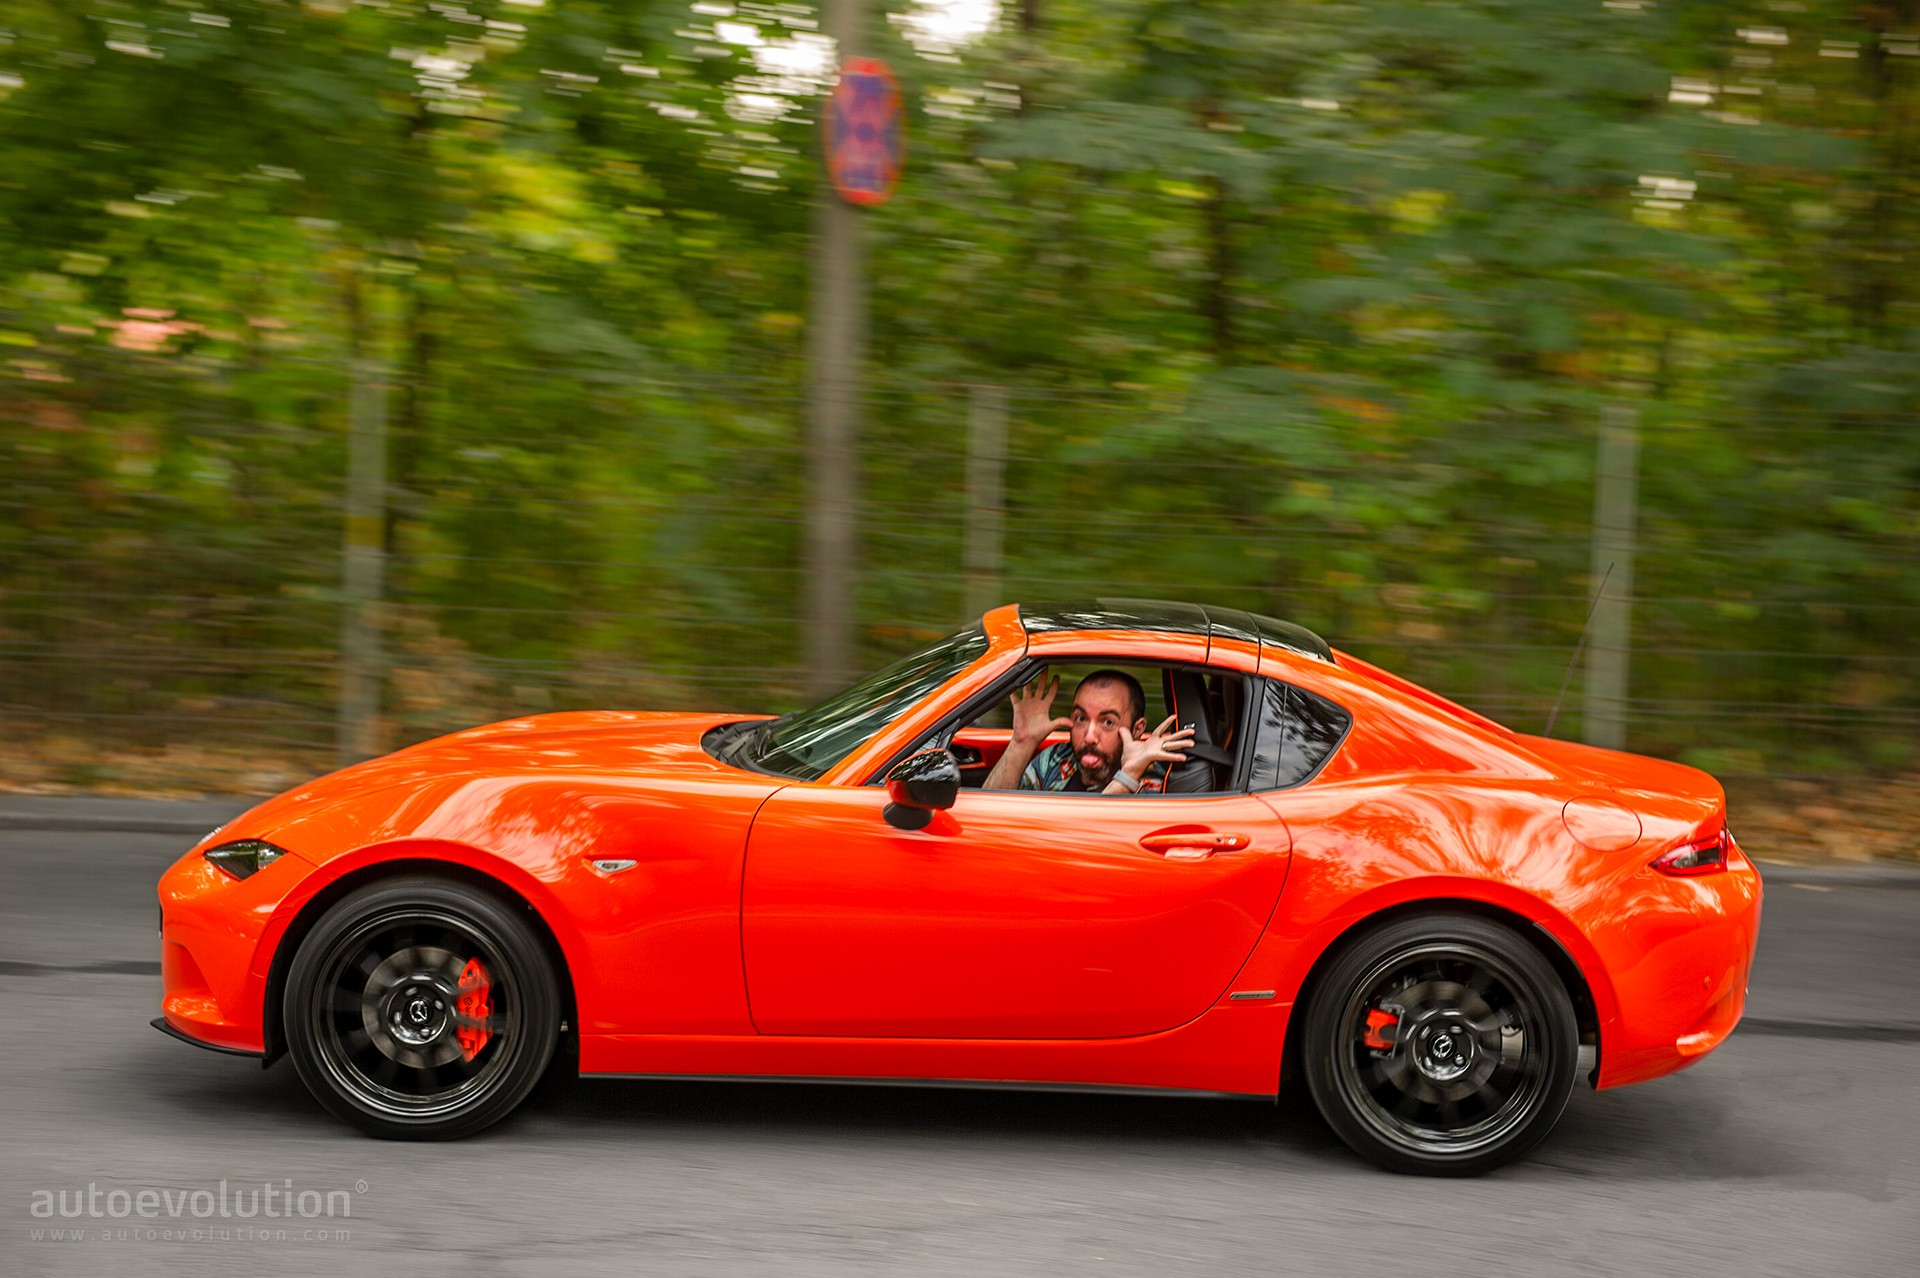 2024 Mazda MX5 Miata Will Not Be an EV, World Exhales in Relief